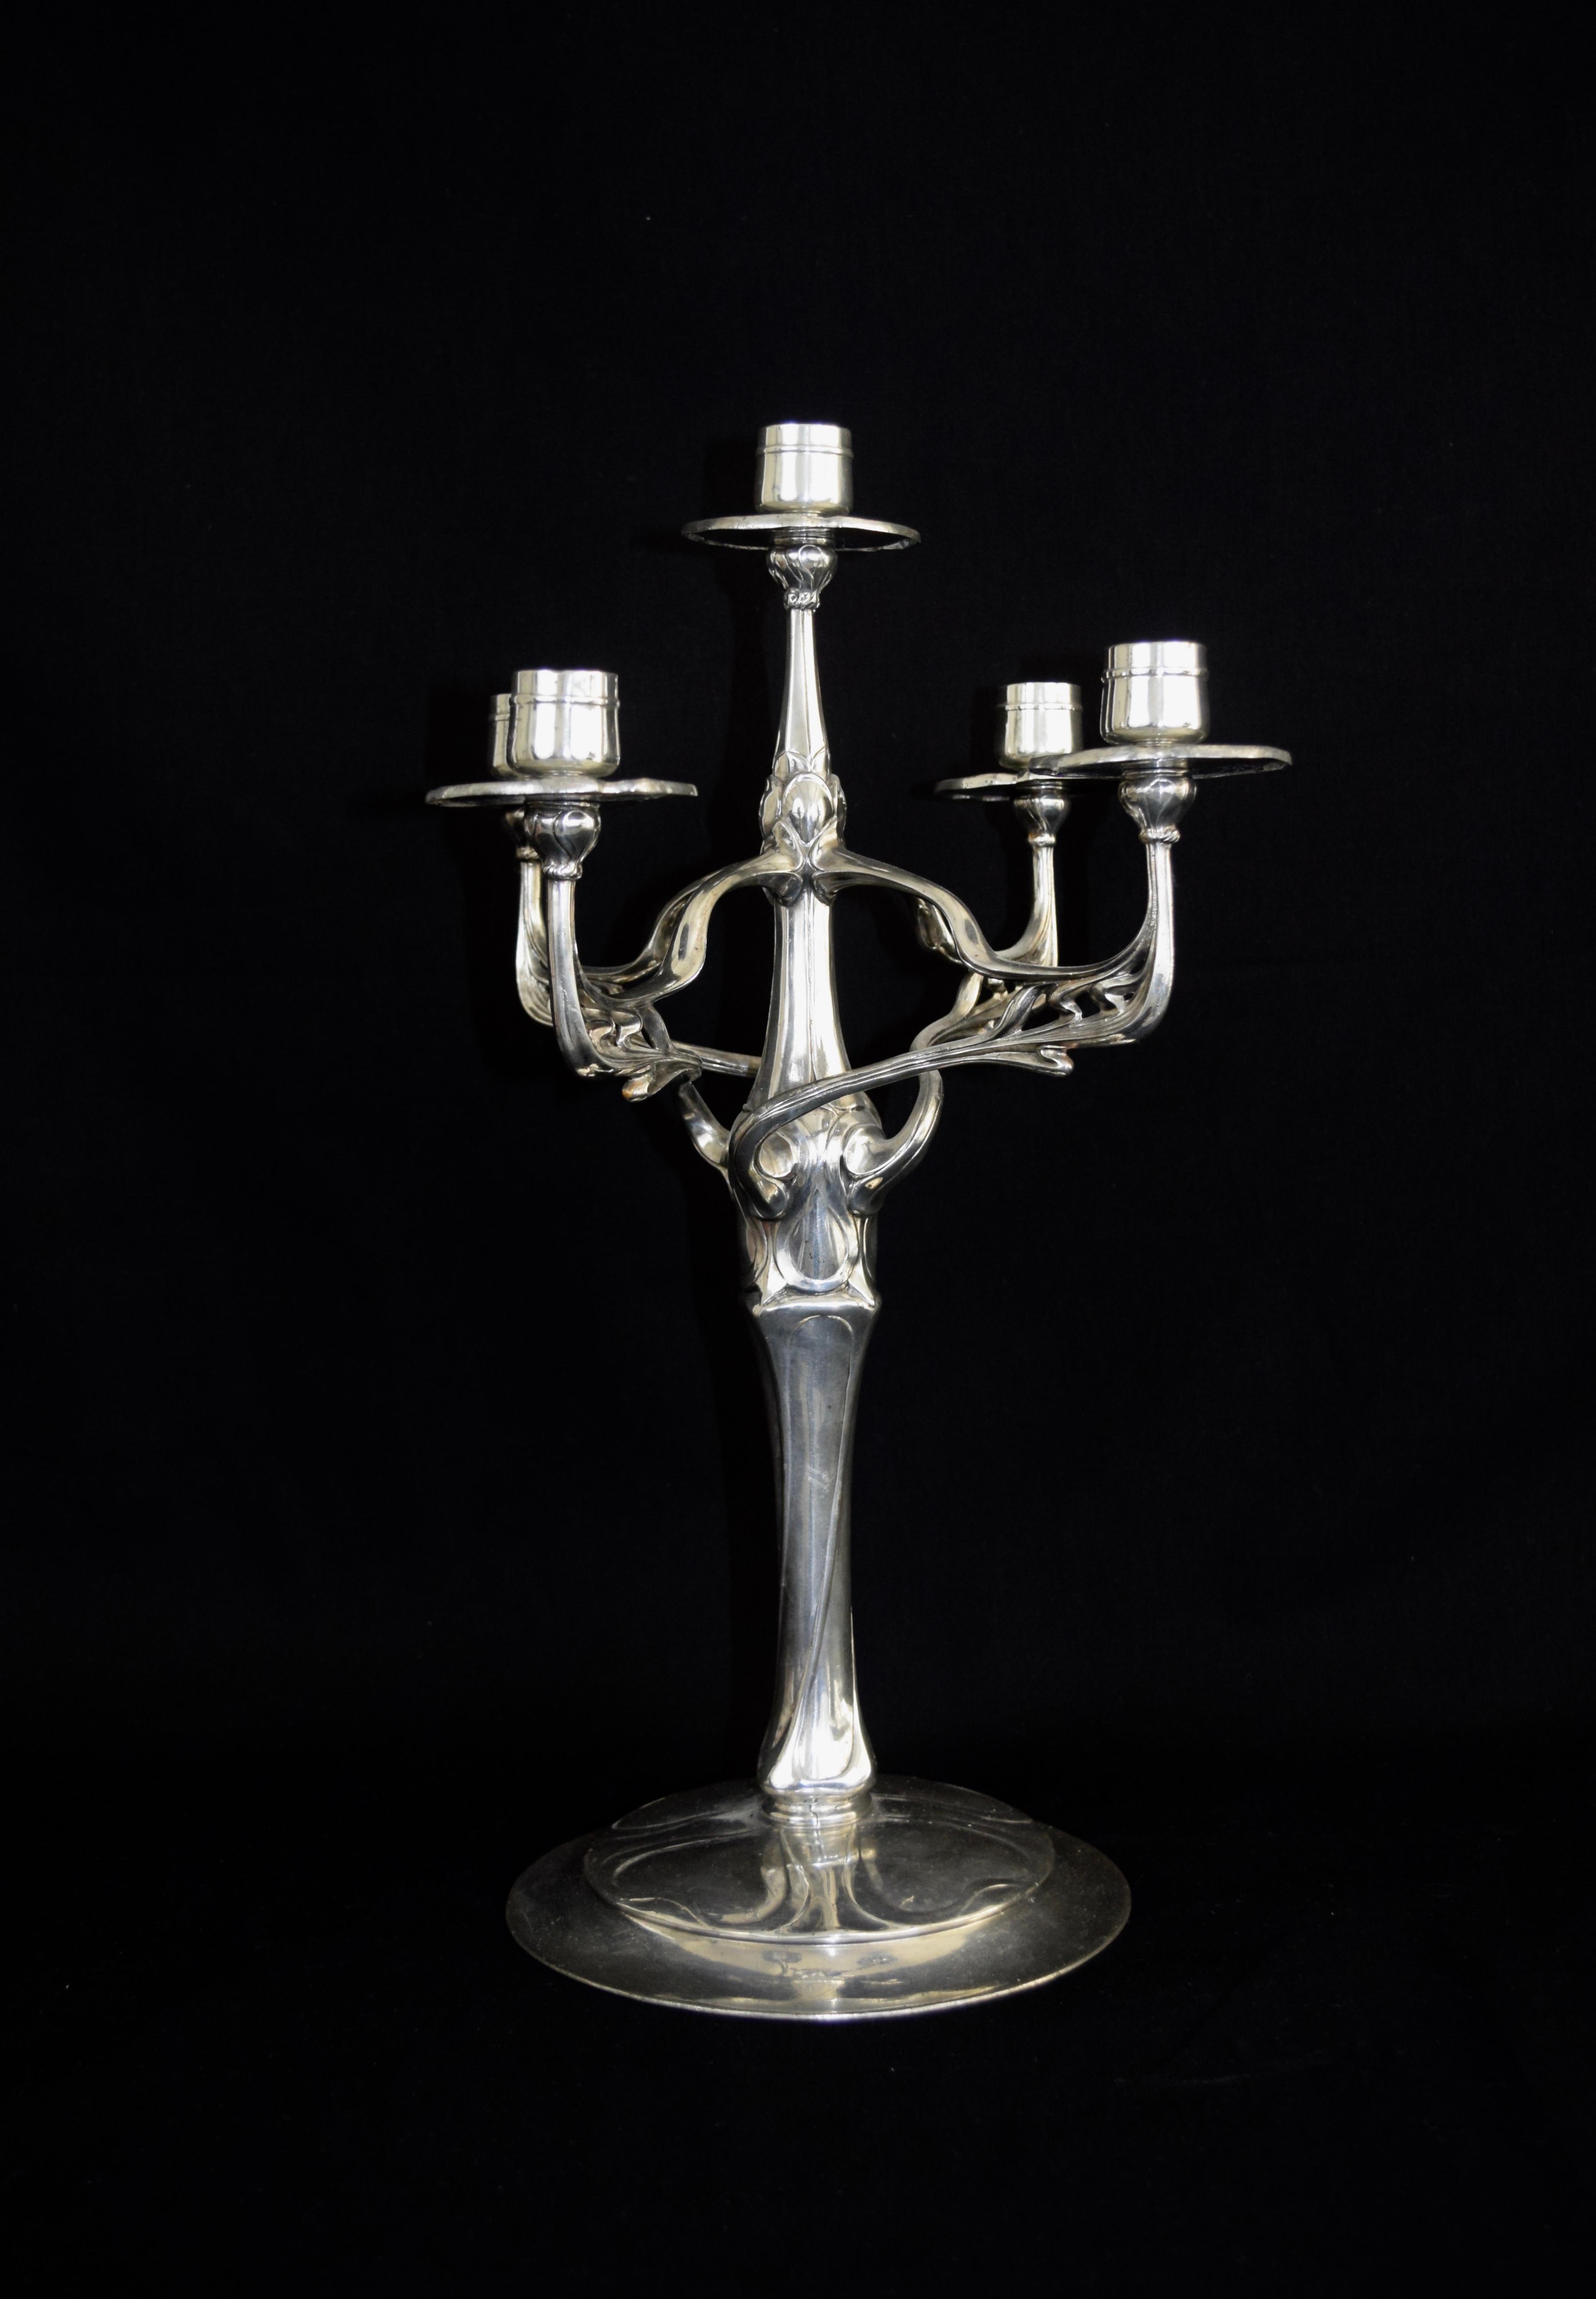 Impressive candelabra (in German Kerzenleuchter or Girandole) by the famous artist Friedrich Adler. This candelabra can be considered as one of his top pieces and is certainly one of the Jugendstil or Art Nouveau silver pewter top designs ever made.